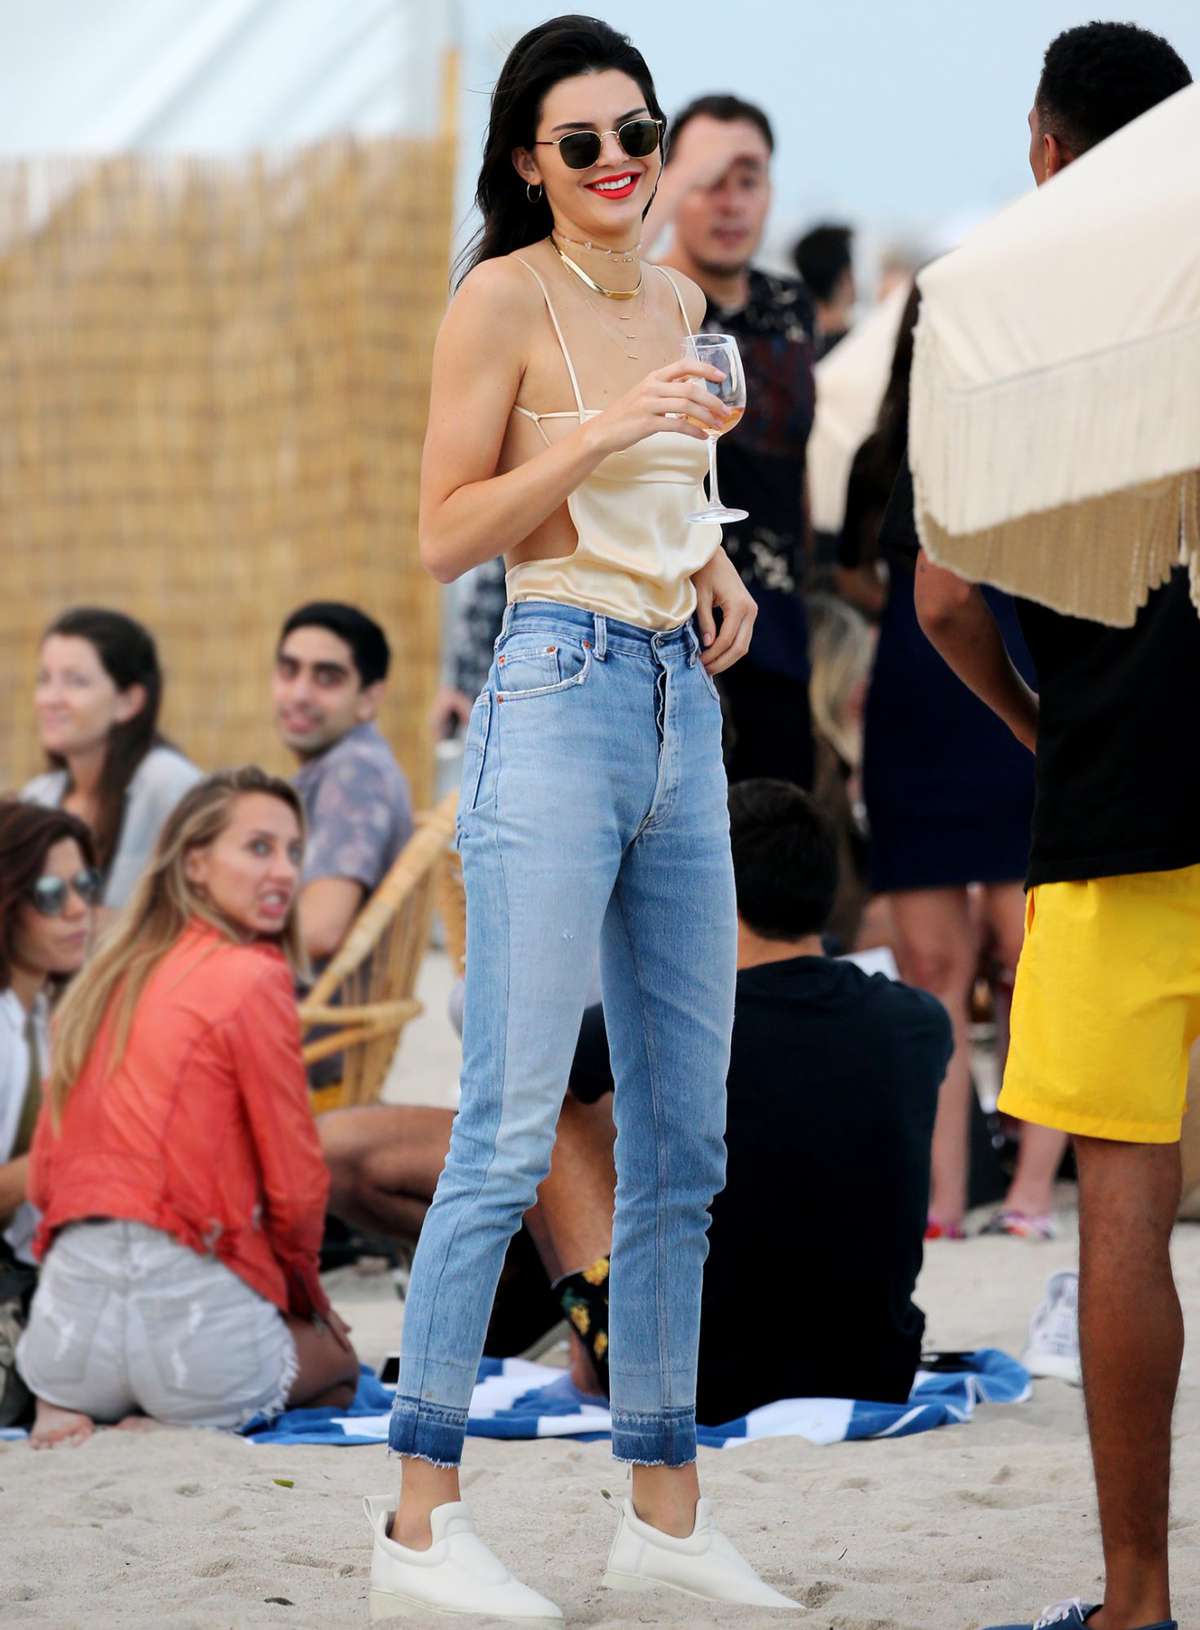 December 4, 2016: Kendall Jenner wears a revealing strappy top and jeans as she enjoys a glass of wine on the beach in Miami. Mandatory Credit: INSTARimages